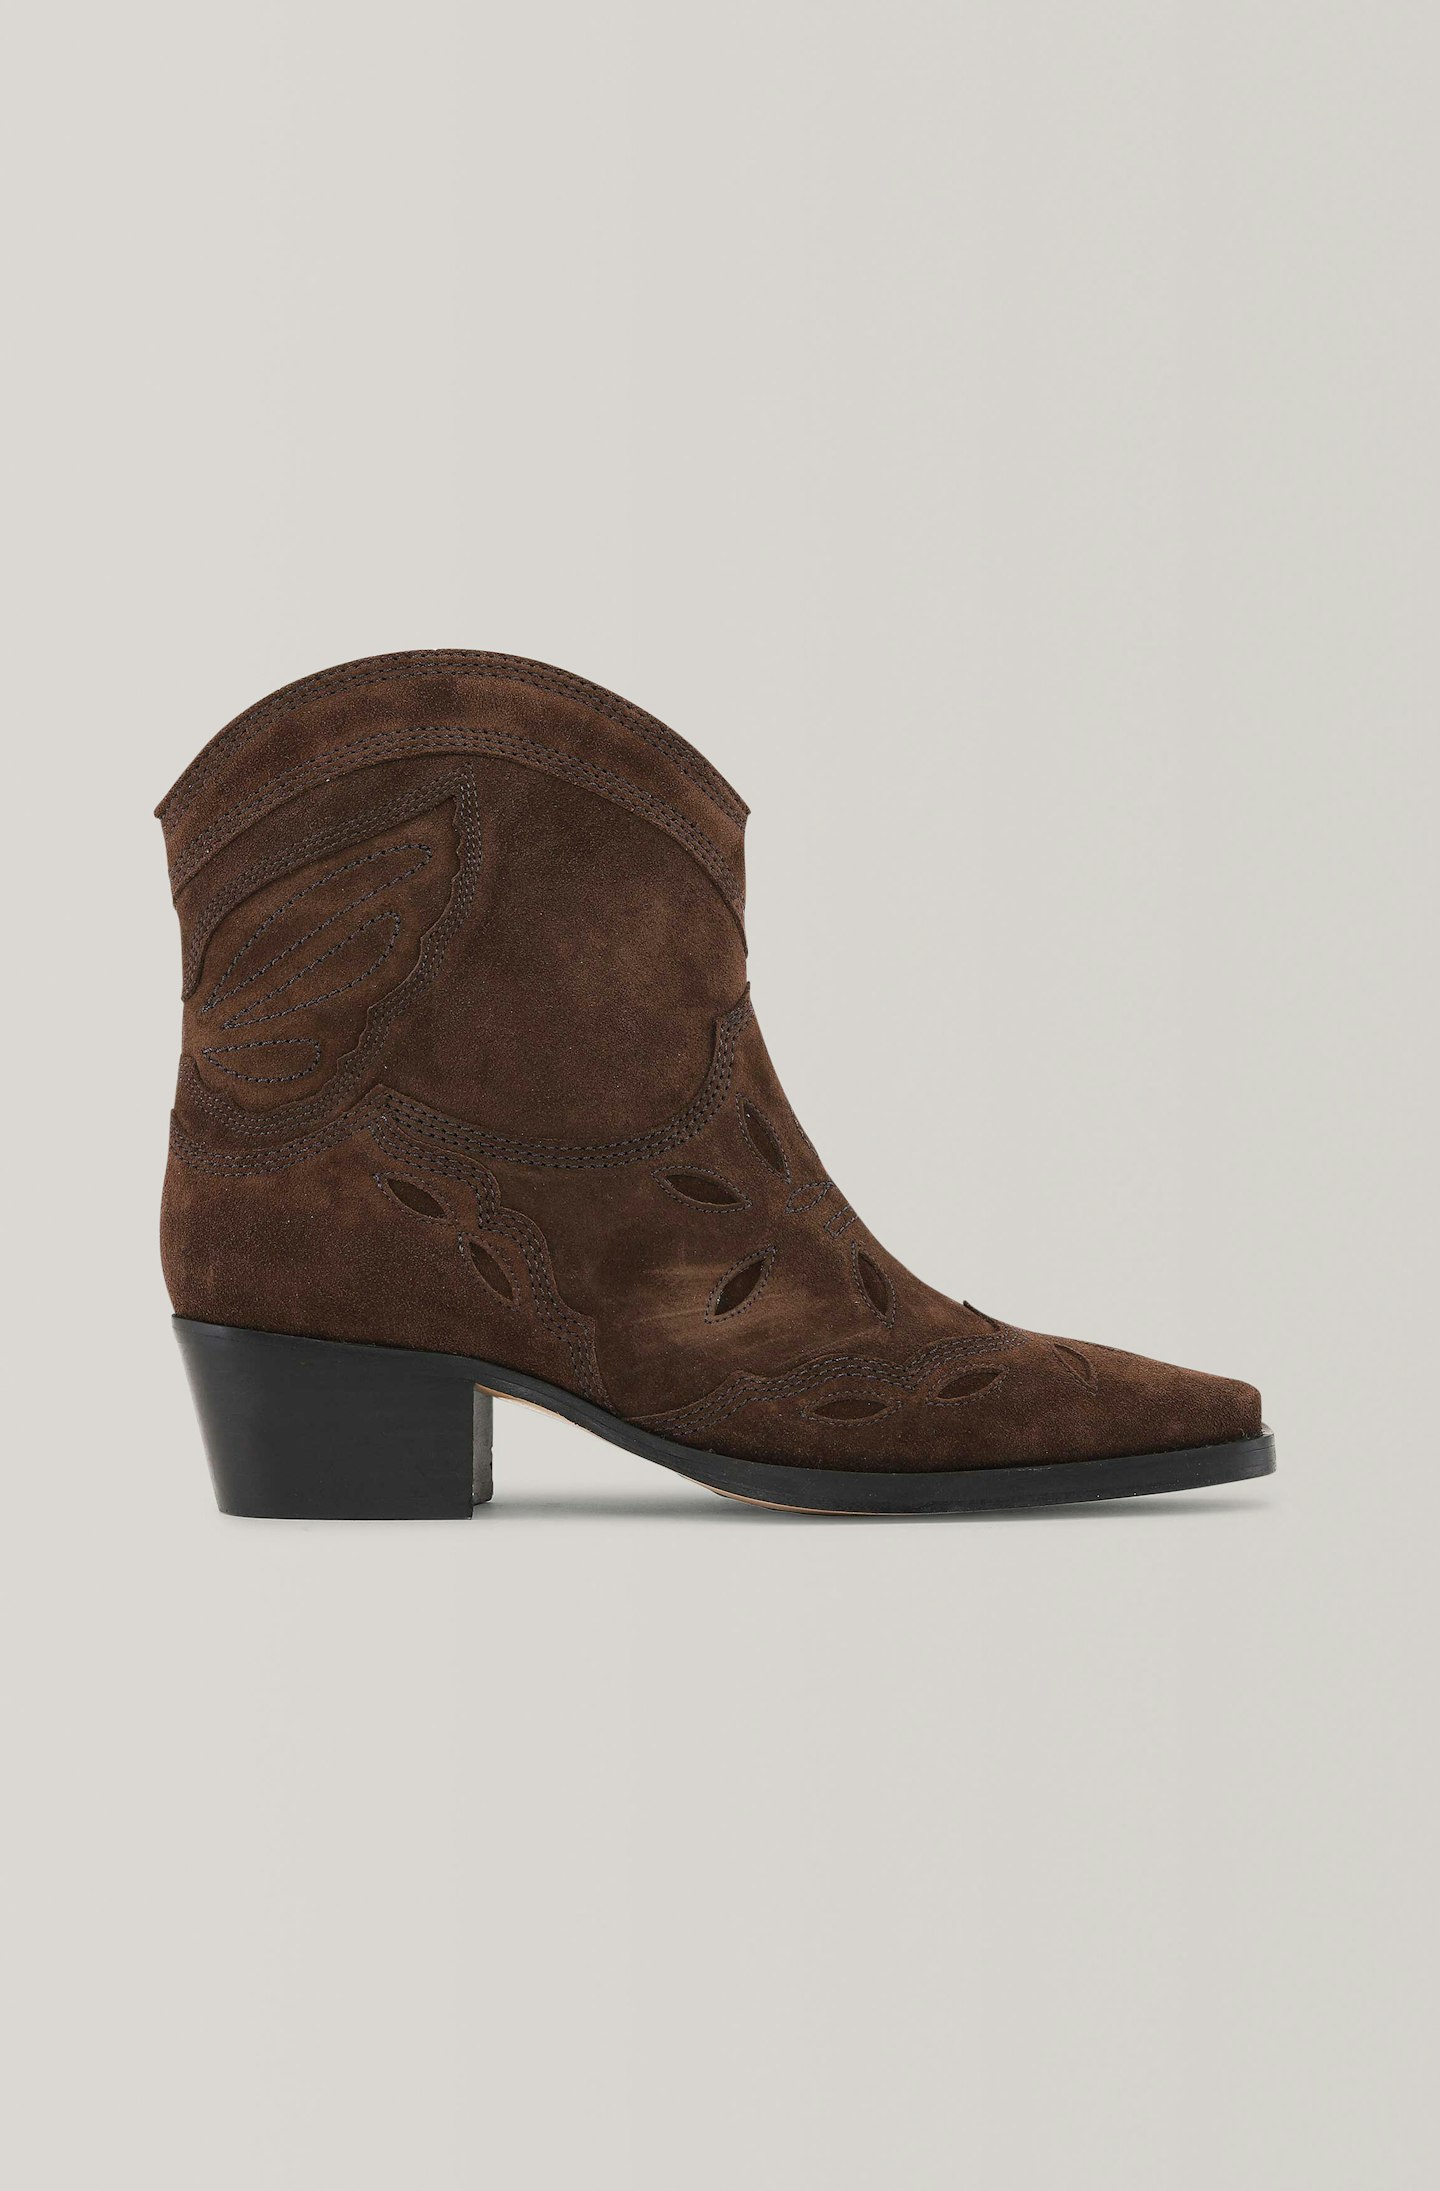 Ganni, Low Texas Ankle Boots, Was £430, Now £215